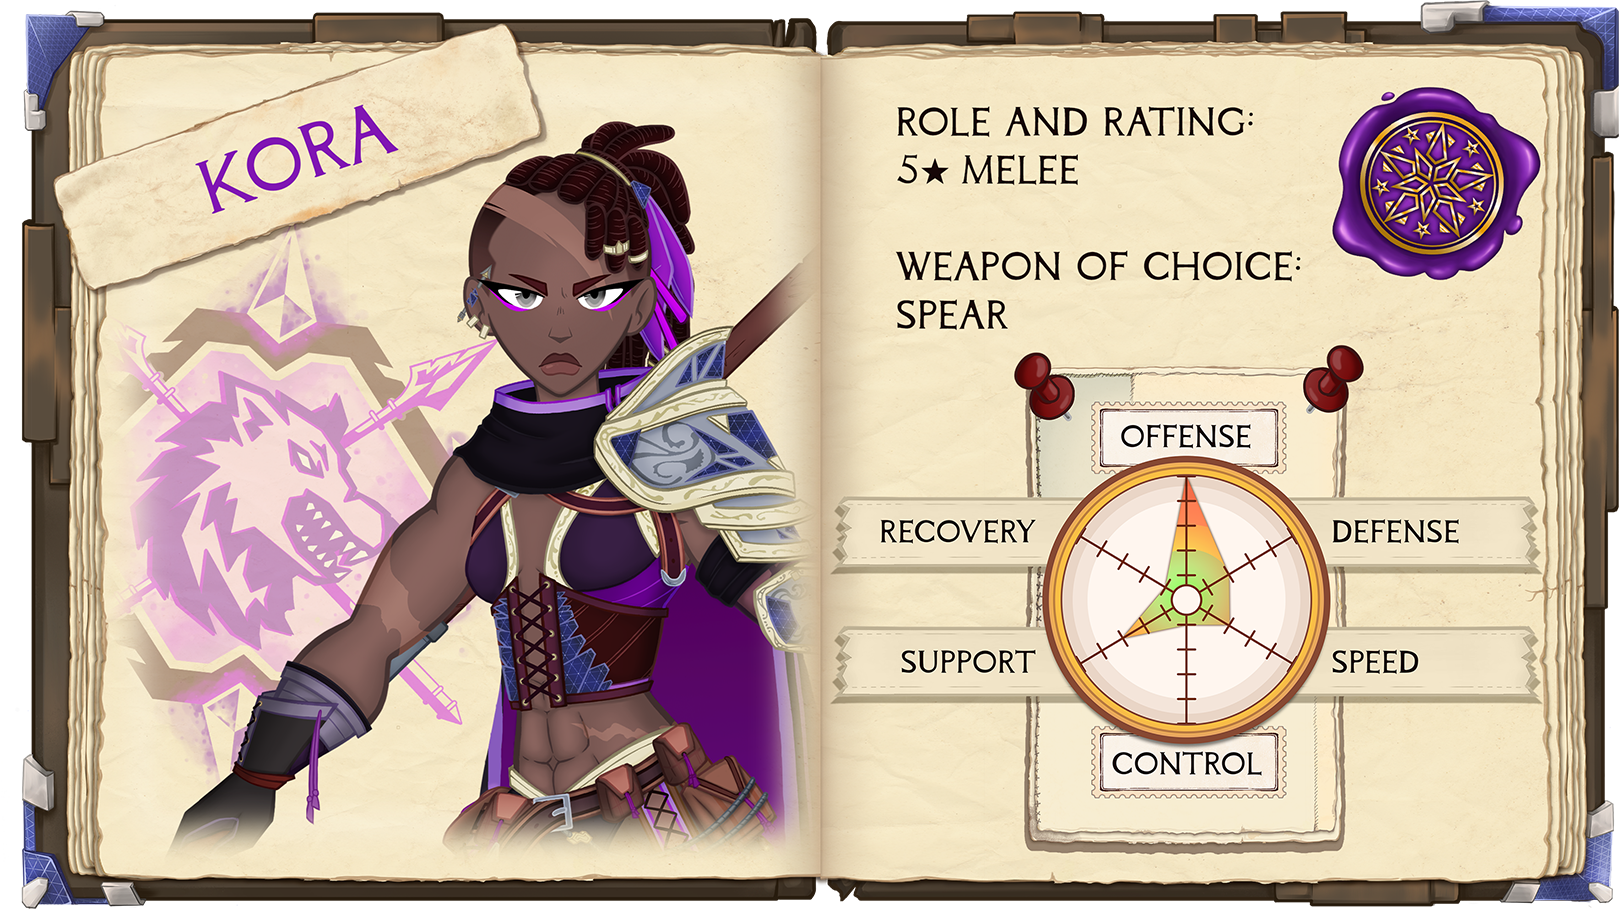 Kora. Role and Rating: 5 Star Melee. Weapon of Choice: Spear: Offense: 5/5. Defense: 2/5. Speed: 2/5. Control: 1/5. Support: 3/5. Recovery: 1/5.